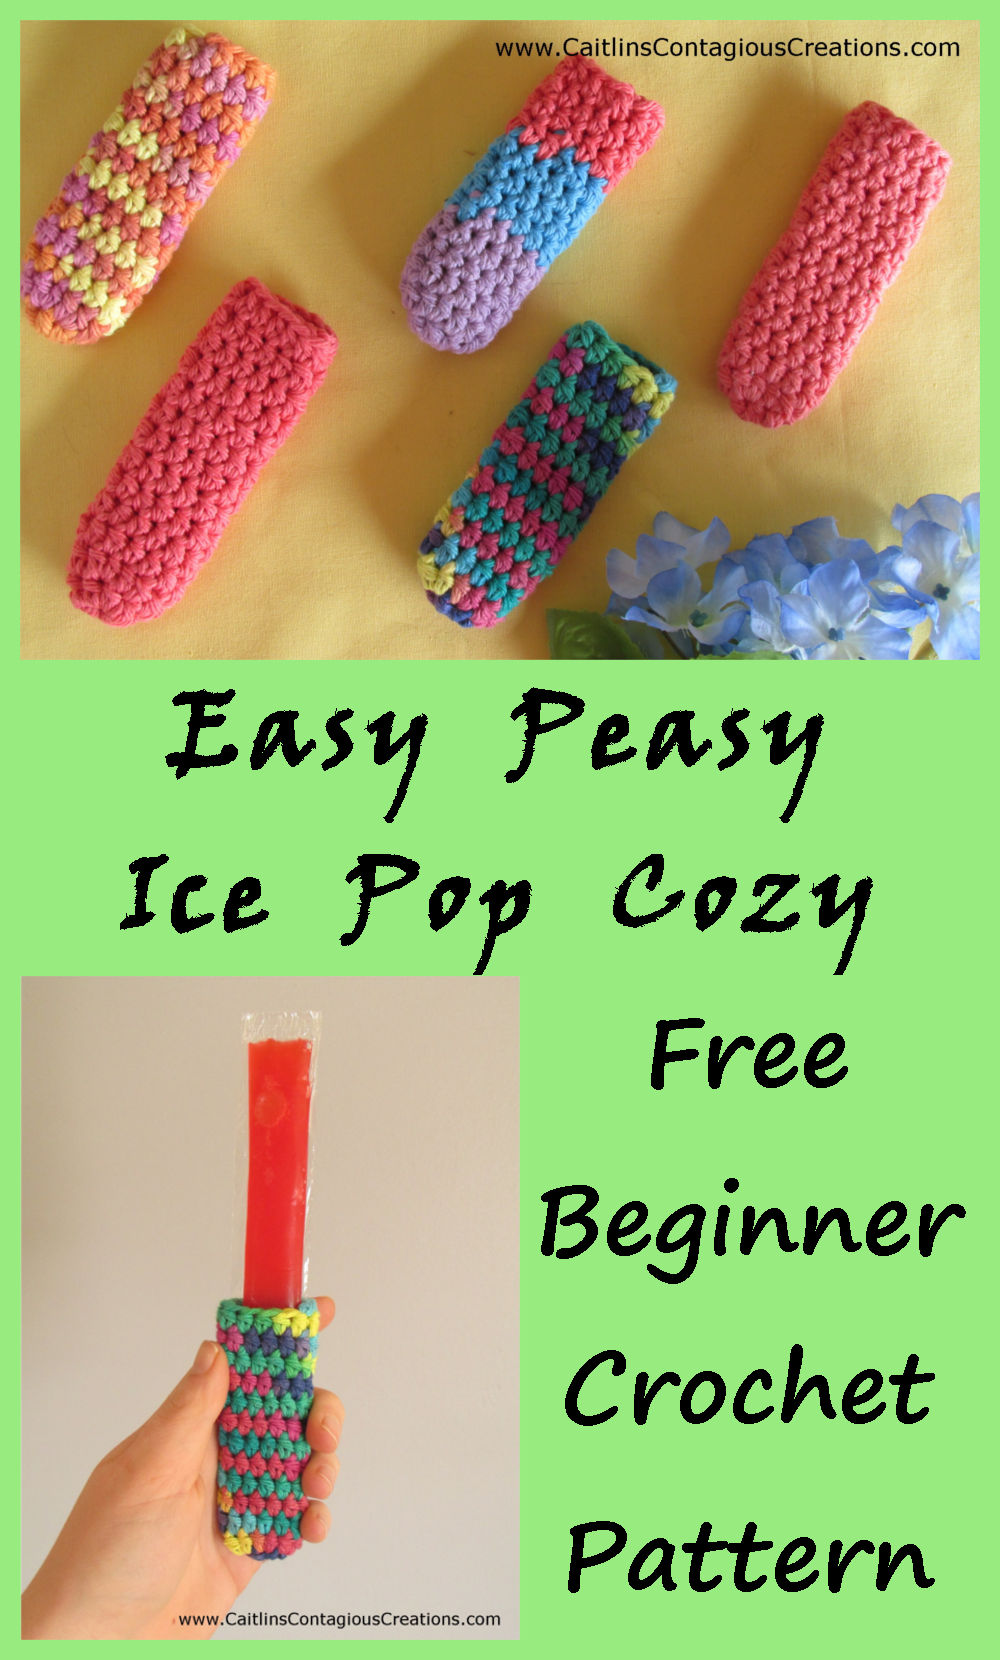 Ice Pop Cozy Crochet Pattern from Caitlin's Contagious Creations. A Free beginner friendly freezer popsicle holder crochet design includes written directions and step by step photos. Make it with machine washable cotton yarn and never have hold or sticky hands again! Make yours now!